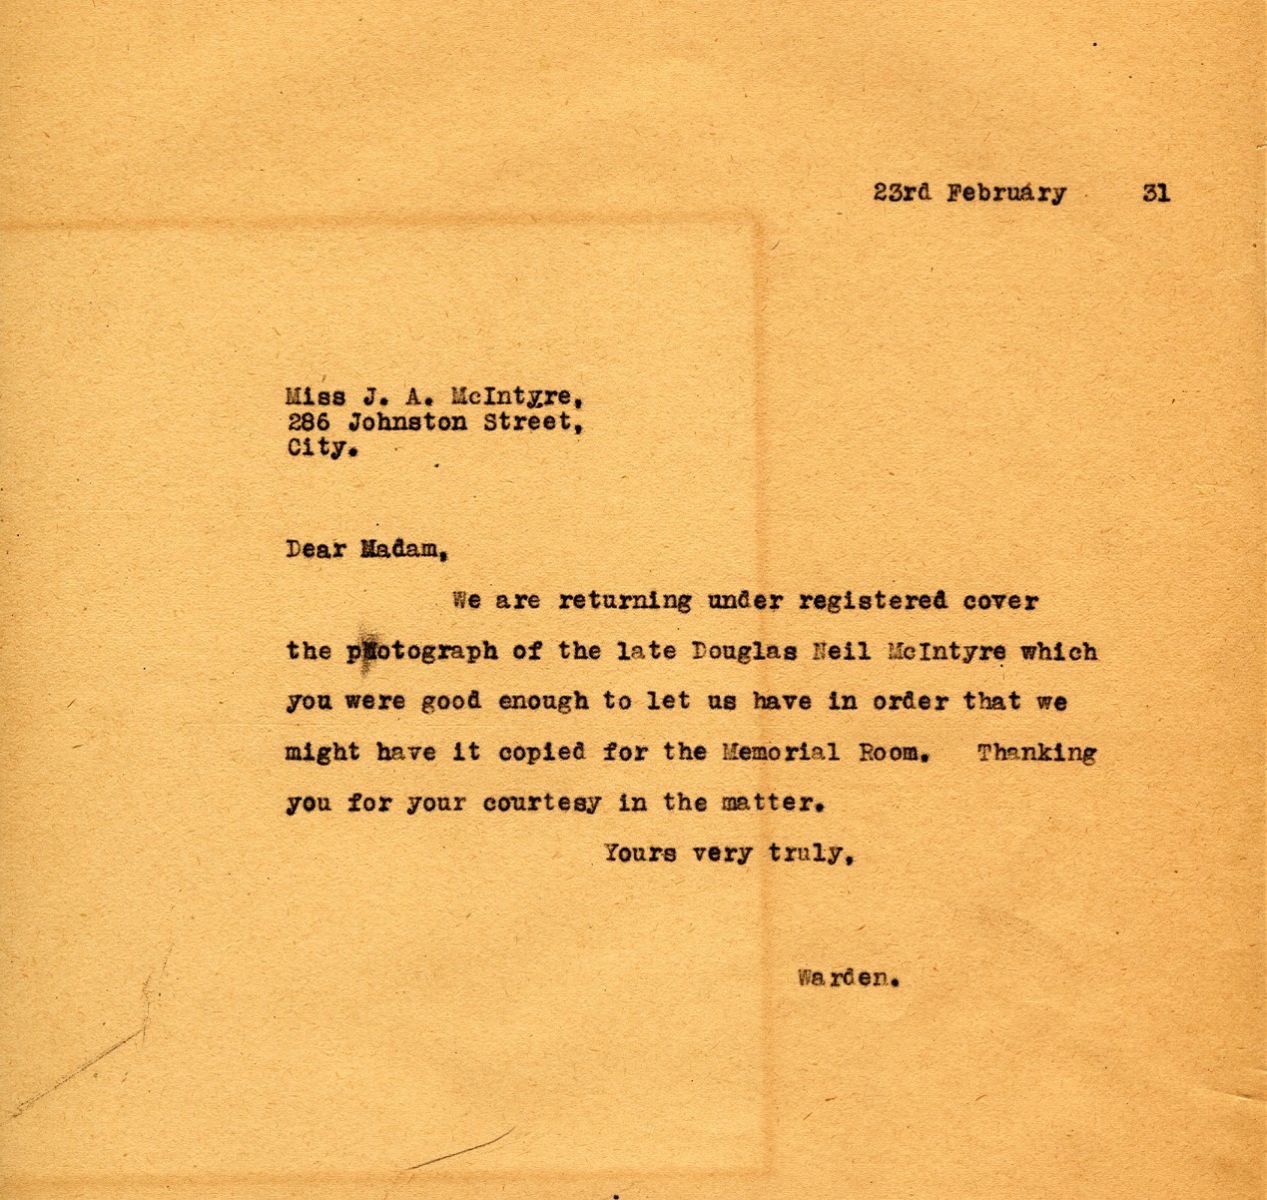 Letter from the Warden to Miss J.A. McIntyre, 23rd February 1931